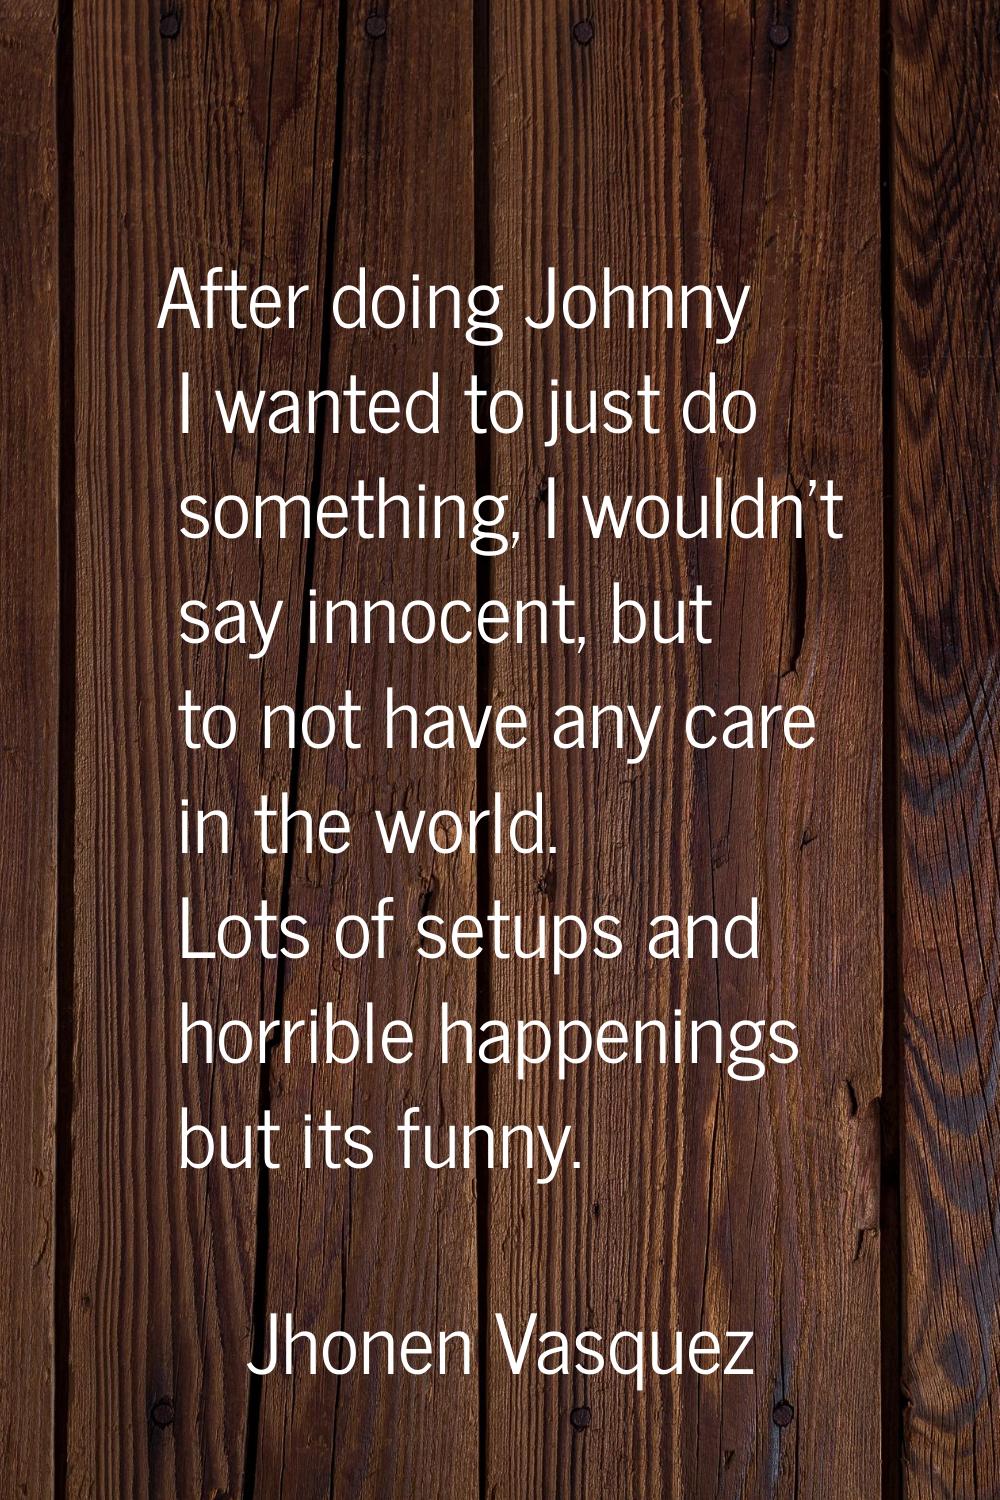 After doing Johnny I wanted to just do something, I wouldn't say innocent, but to not have any care